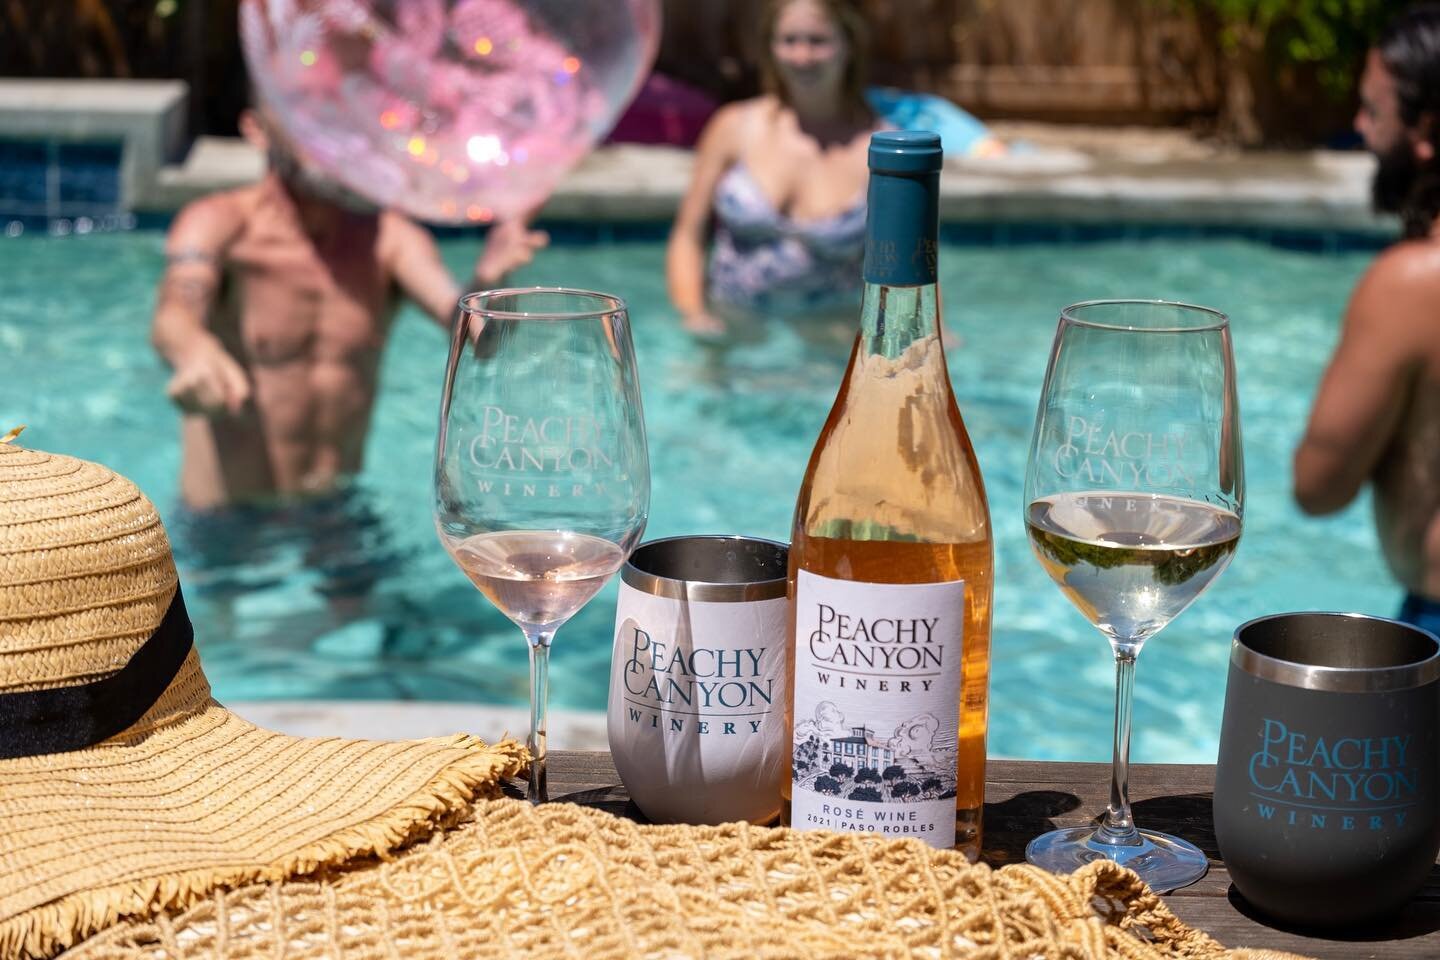 This weather calls for pool time with friends and Peachy Ros&eacute;☀️ How did you spend your Labor Day Weekend? Hopefully in AC or in a body of water🥵
-
-
-
-
#peachycanyonwinery #peachycanyonwines #ros&eacute; #ros&eacute;allday #drinkpink #yesway